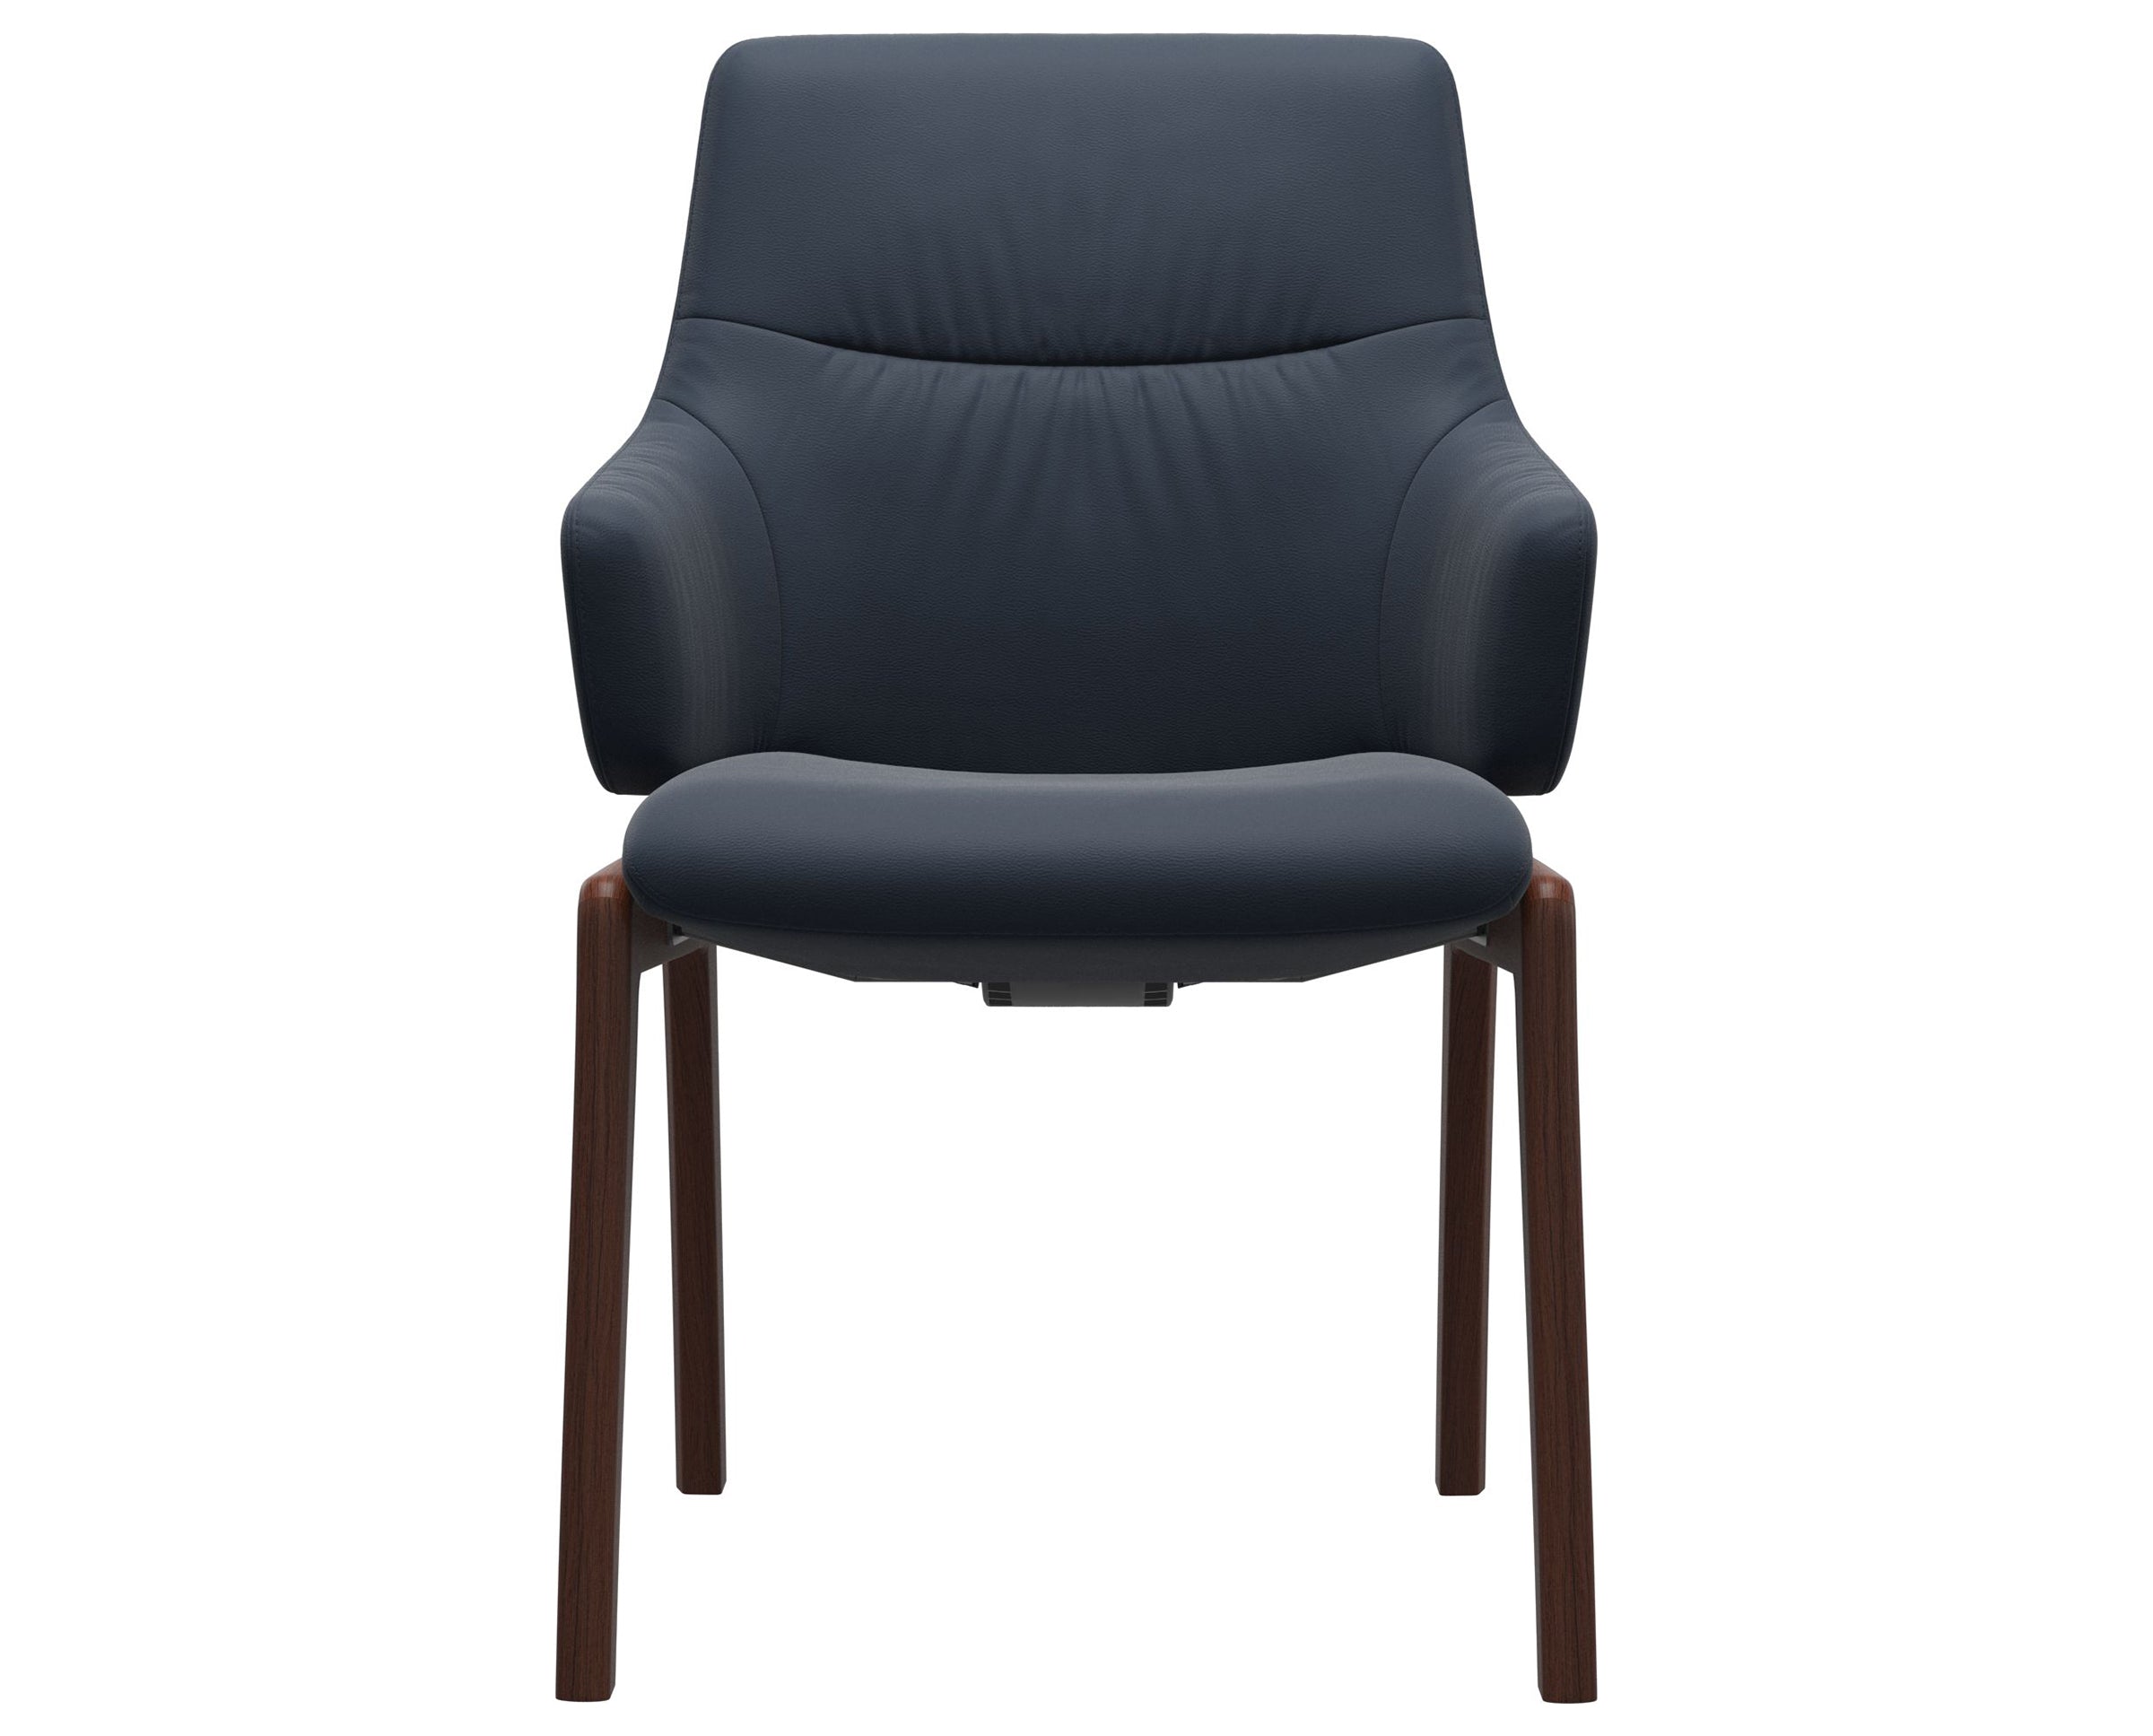 Paloma Leather Oxford Blue and Walnut Base | Stressless Mint Low Back D100 Dining Chair w/Arms | Valley Ridge Furniture